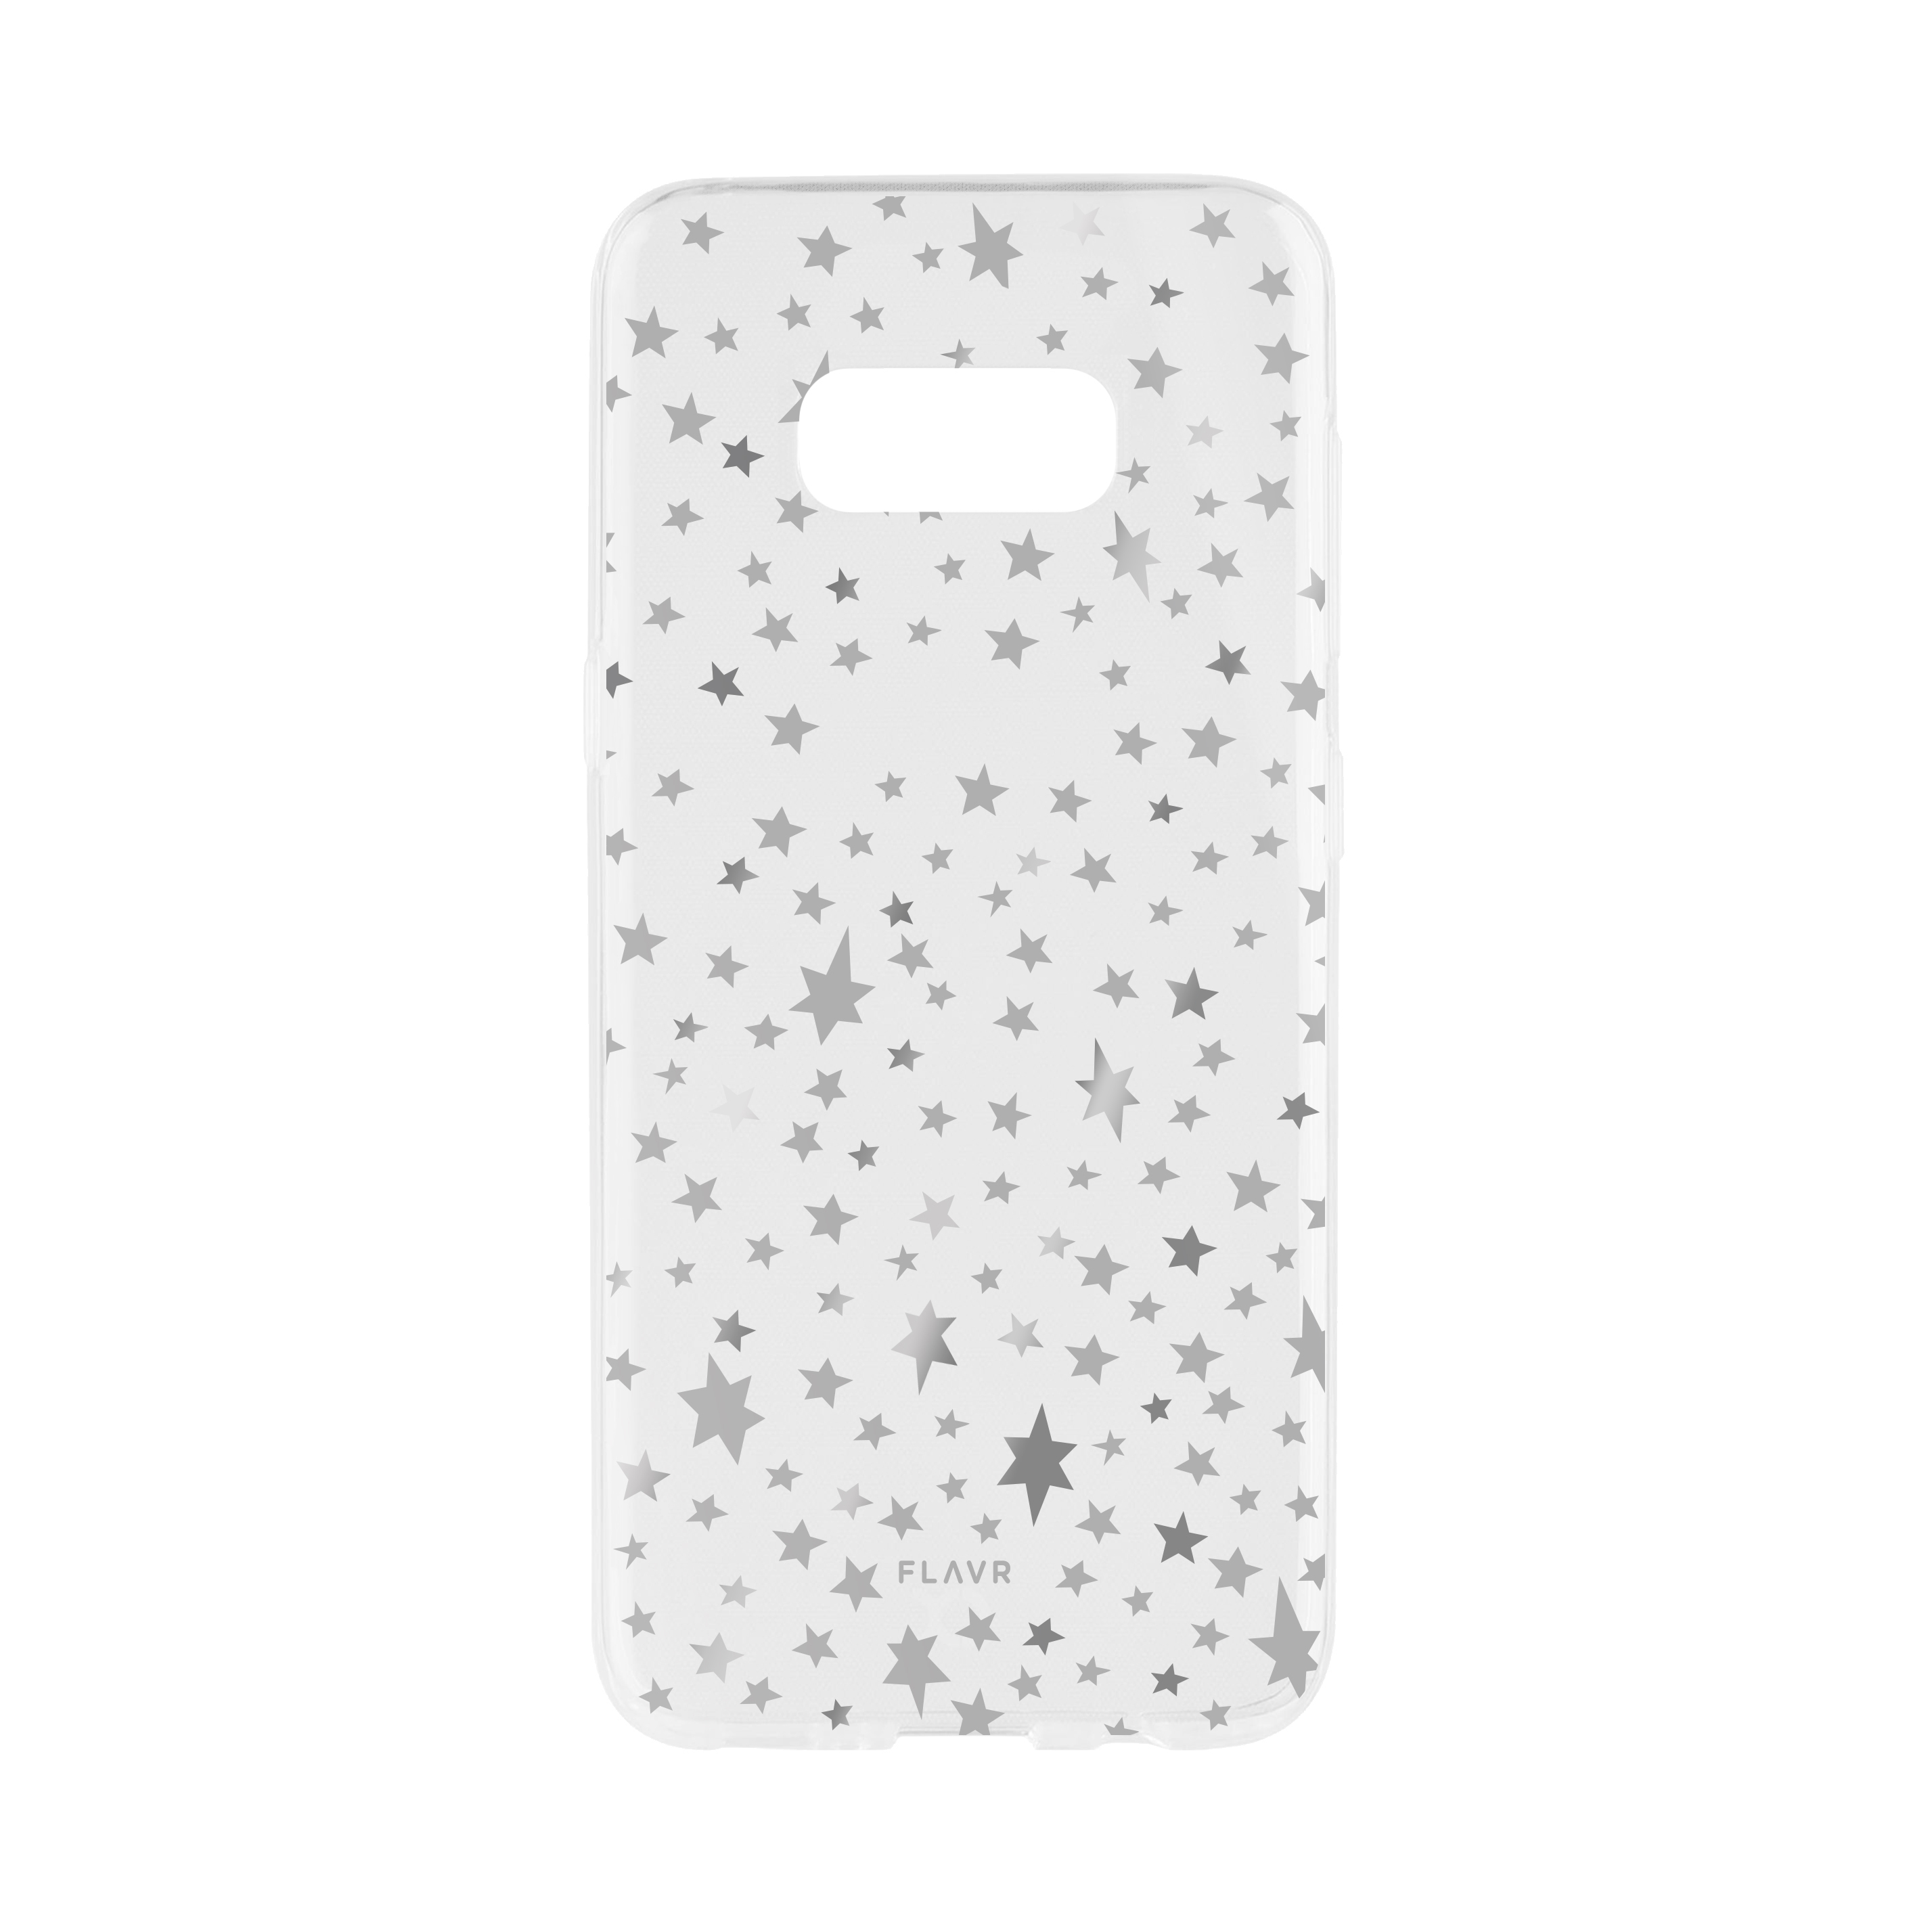 FLAVR iPlate Starry Nights, Backcover, NOTE 8, GALAXY COLOURFUL SAMSUNG